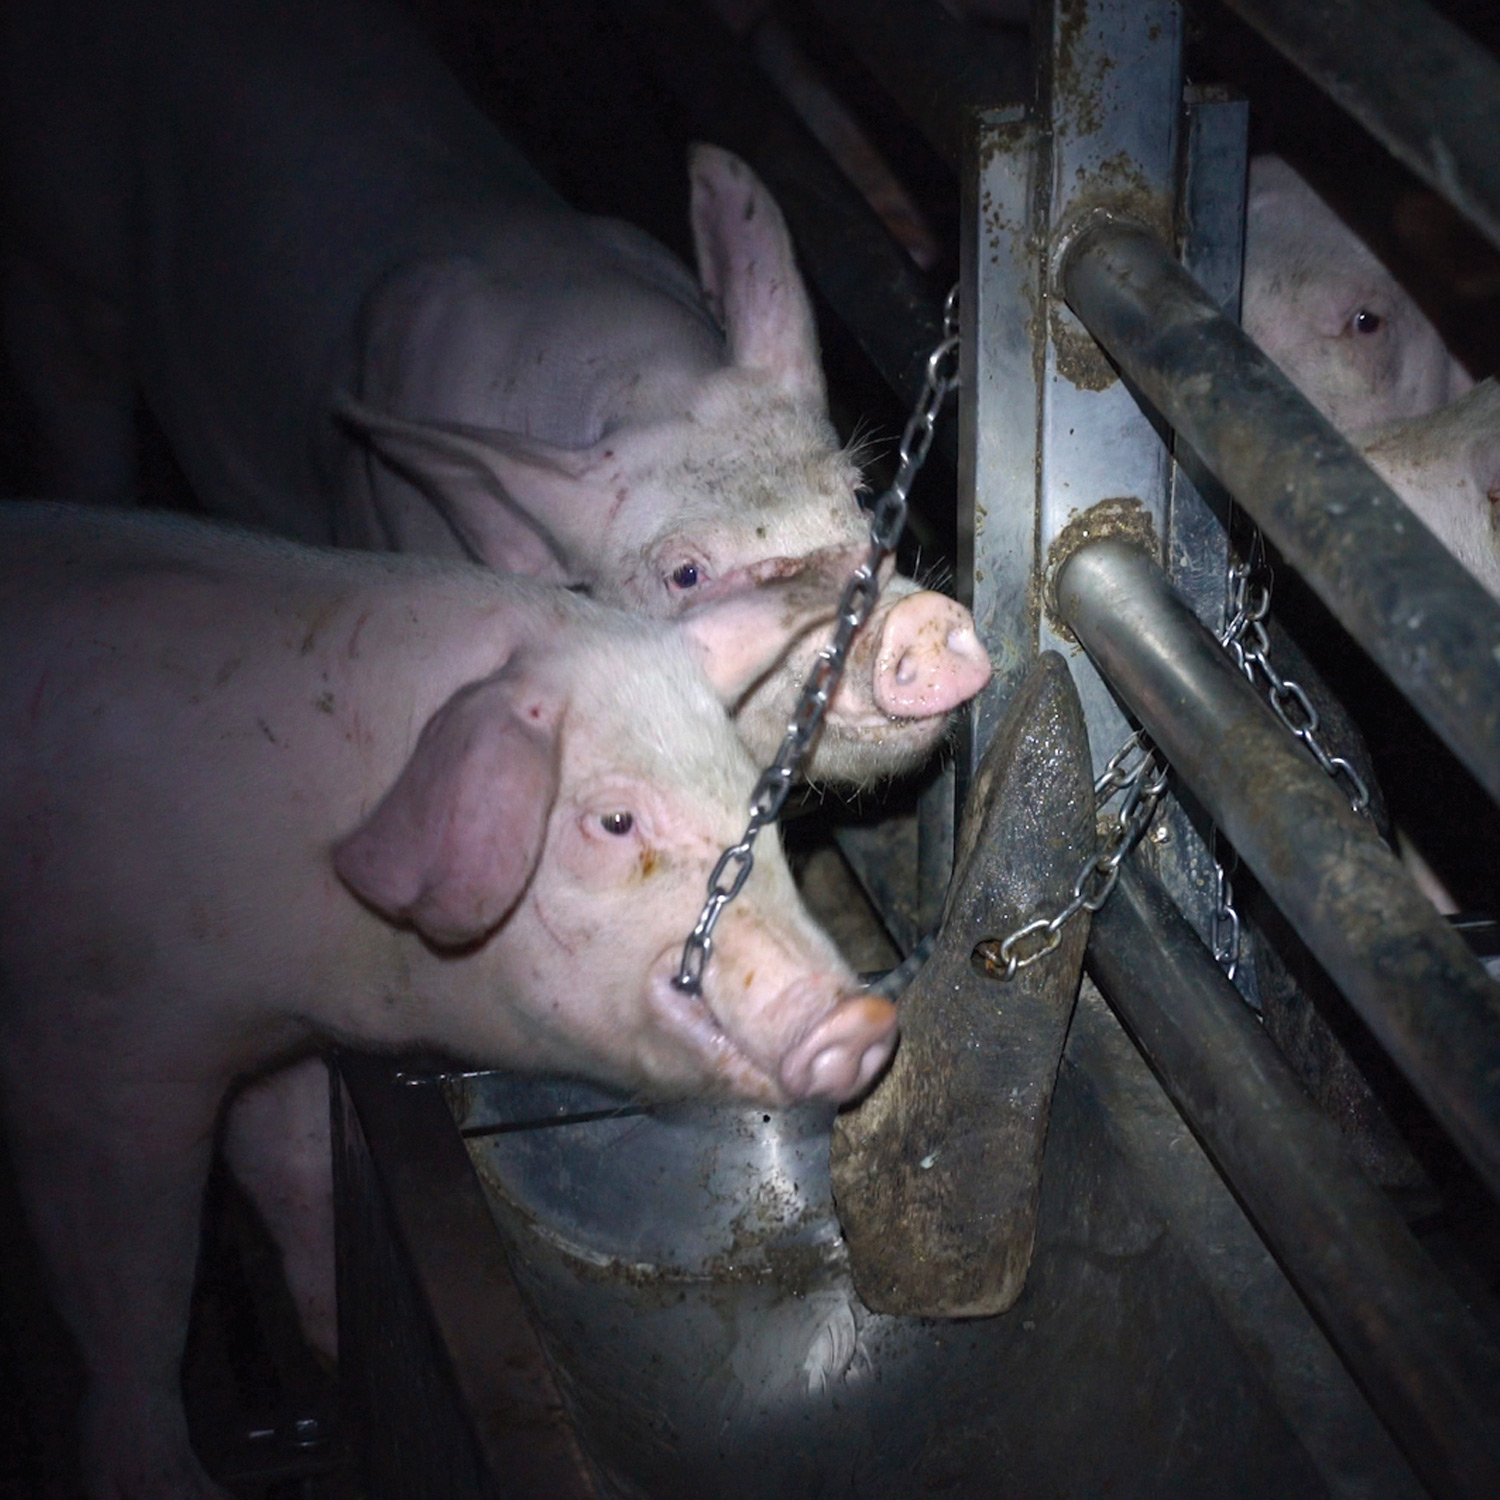 Pigs biting at their cage in a factory farm